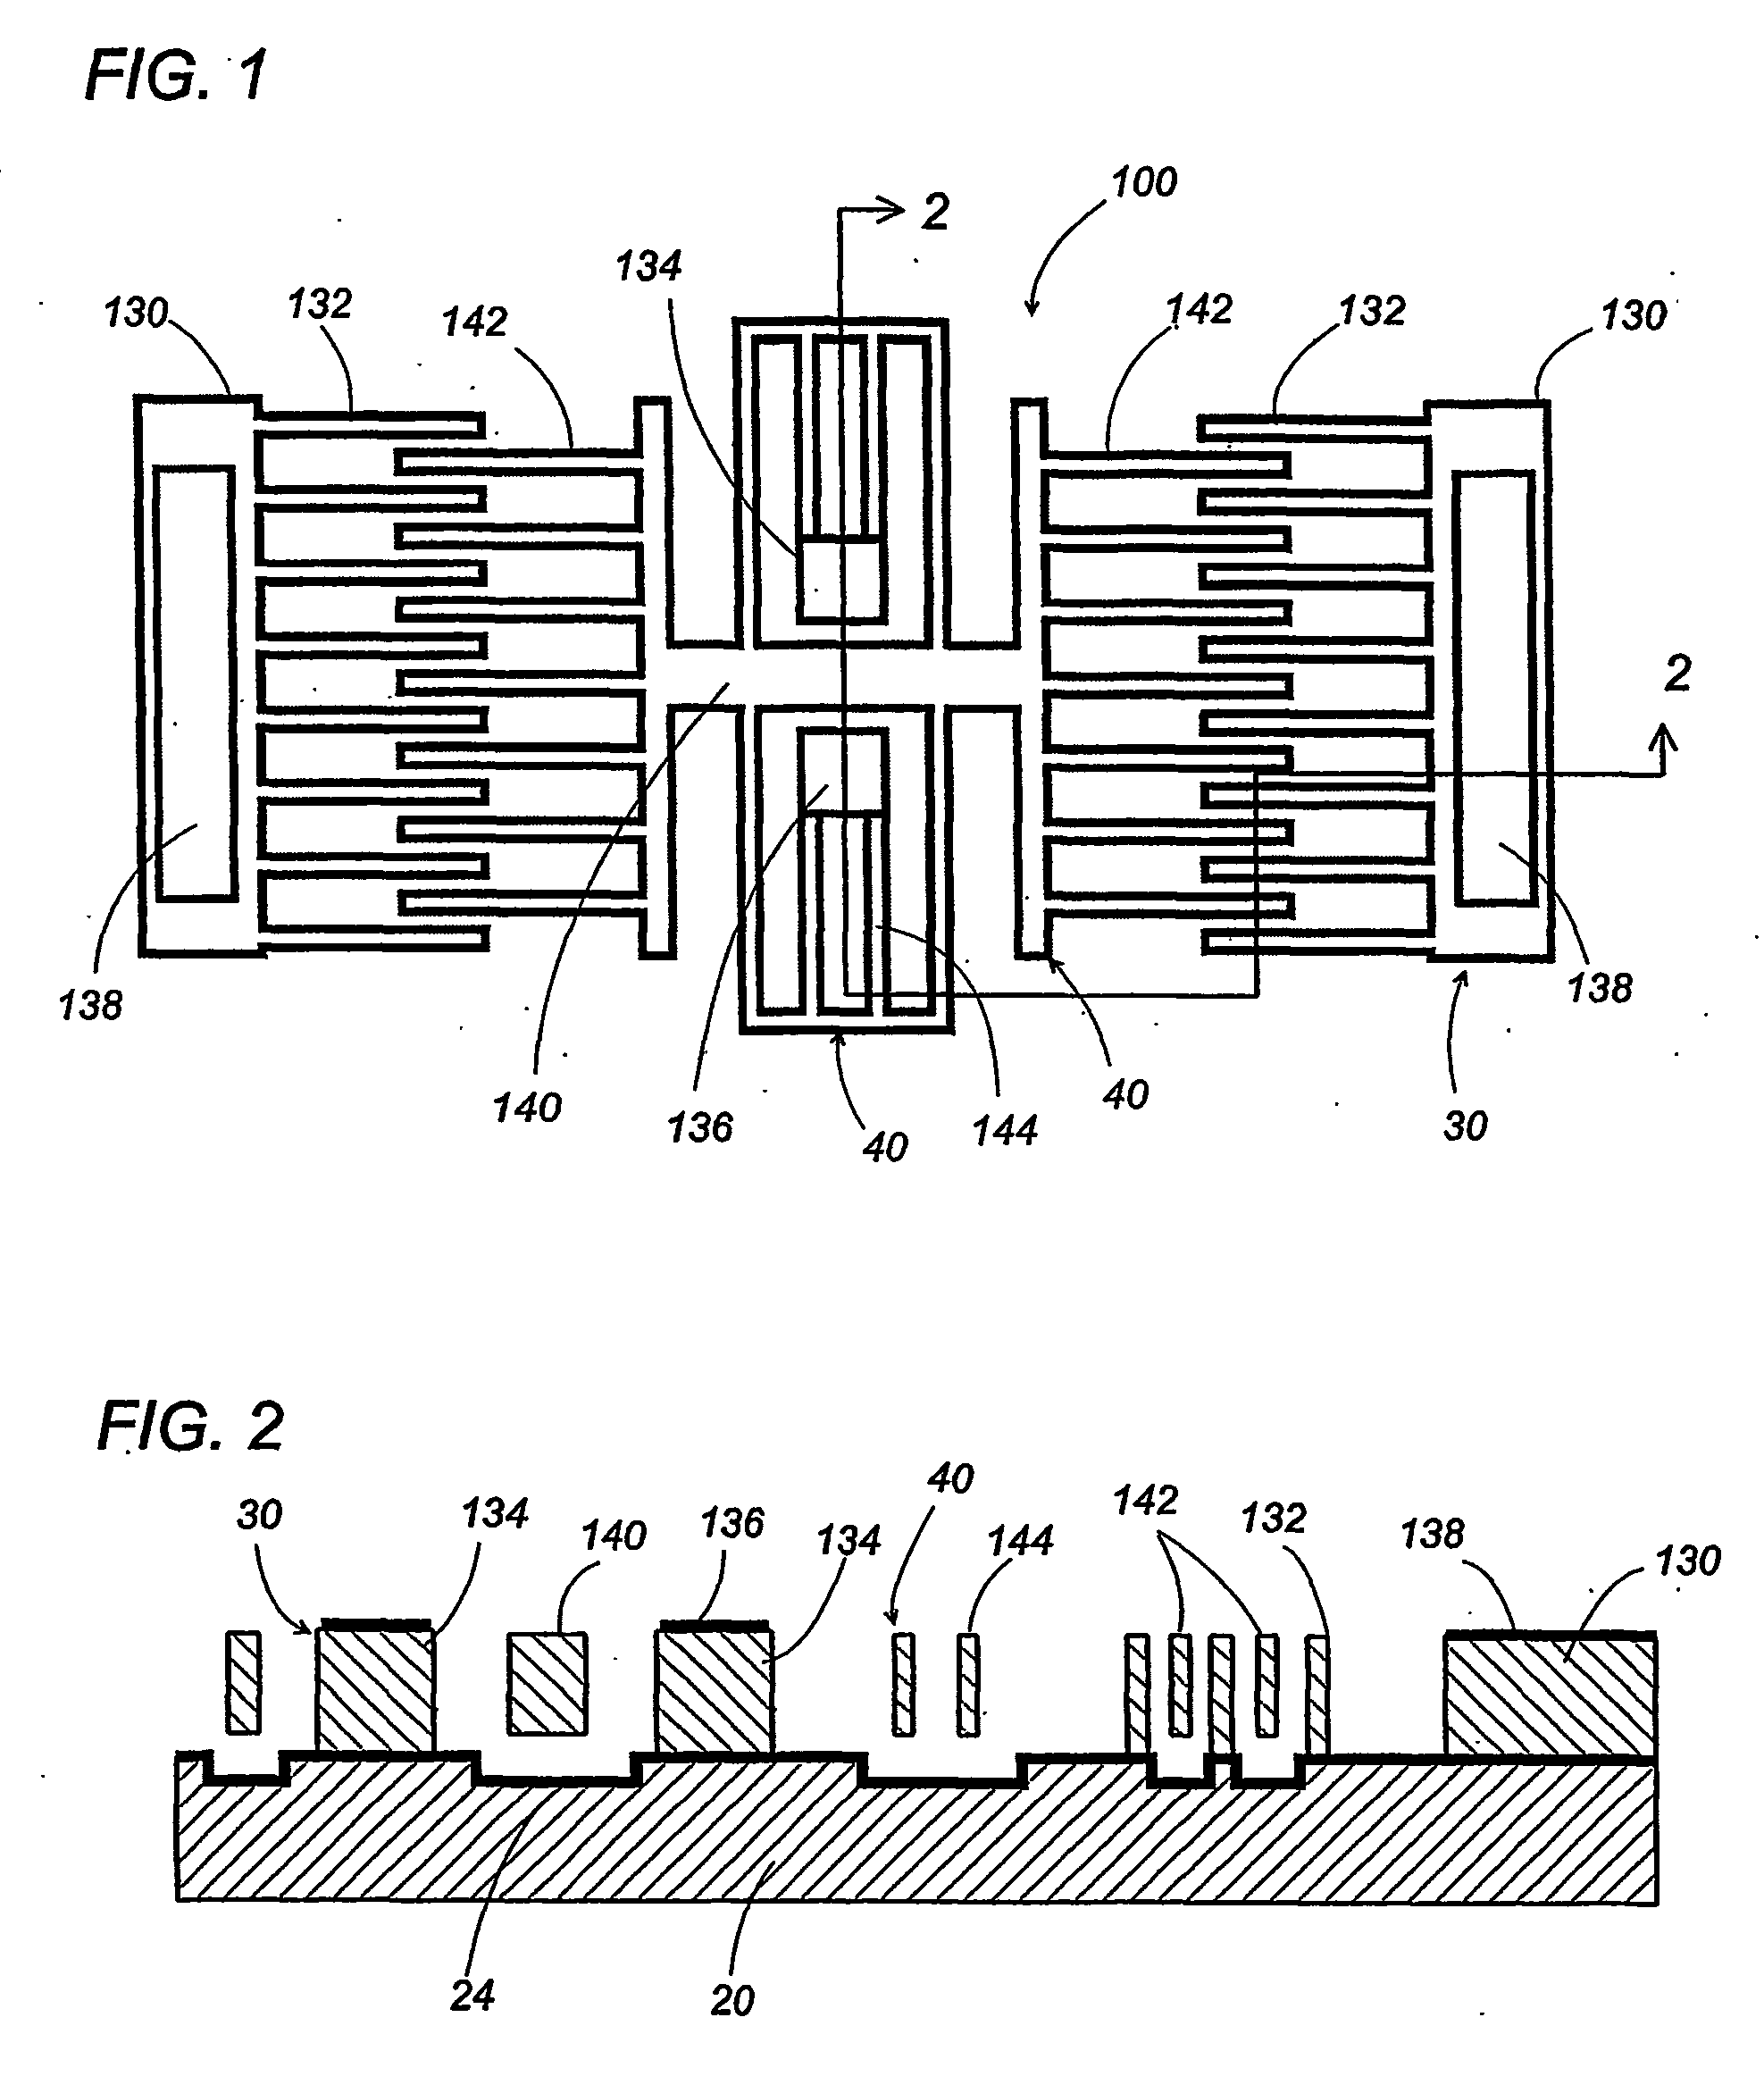 Process for fabricating a micro-electro-mechanical system with movable components